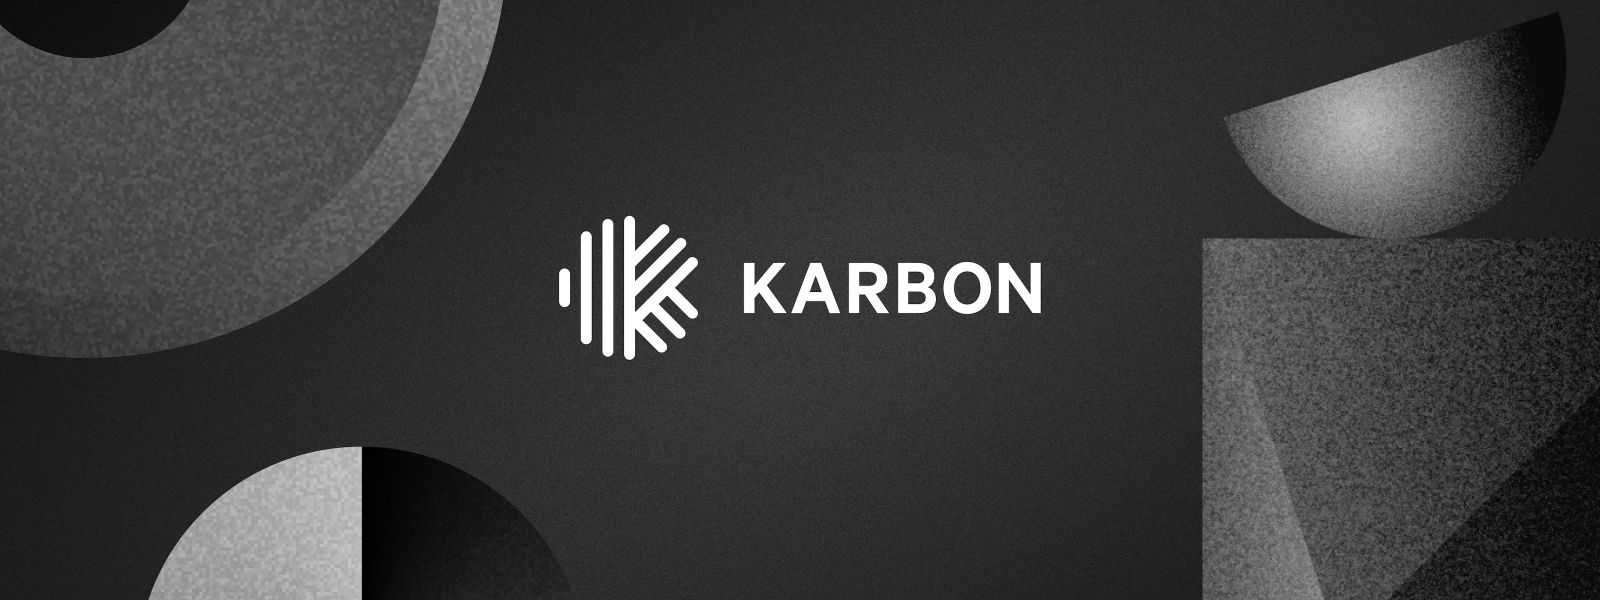 A minimalist, modern grey background with the distinctive "KARBON" logo resembling a digital equalizer at the center.